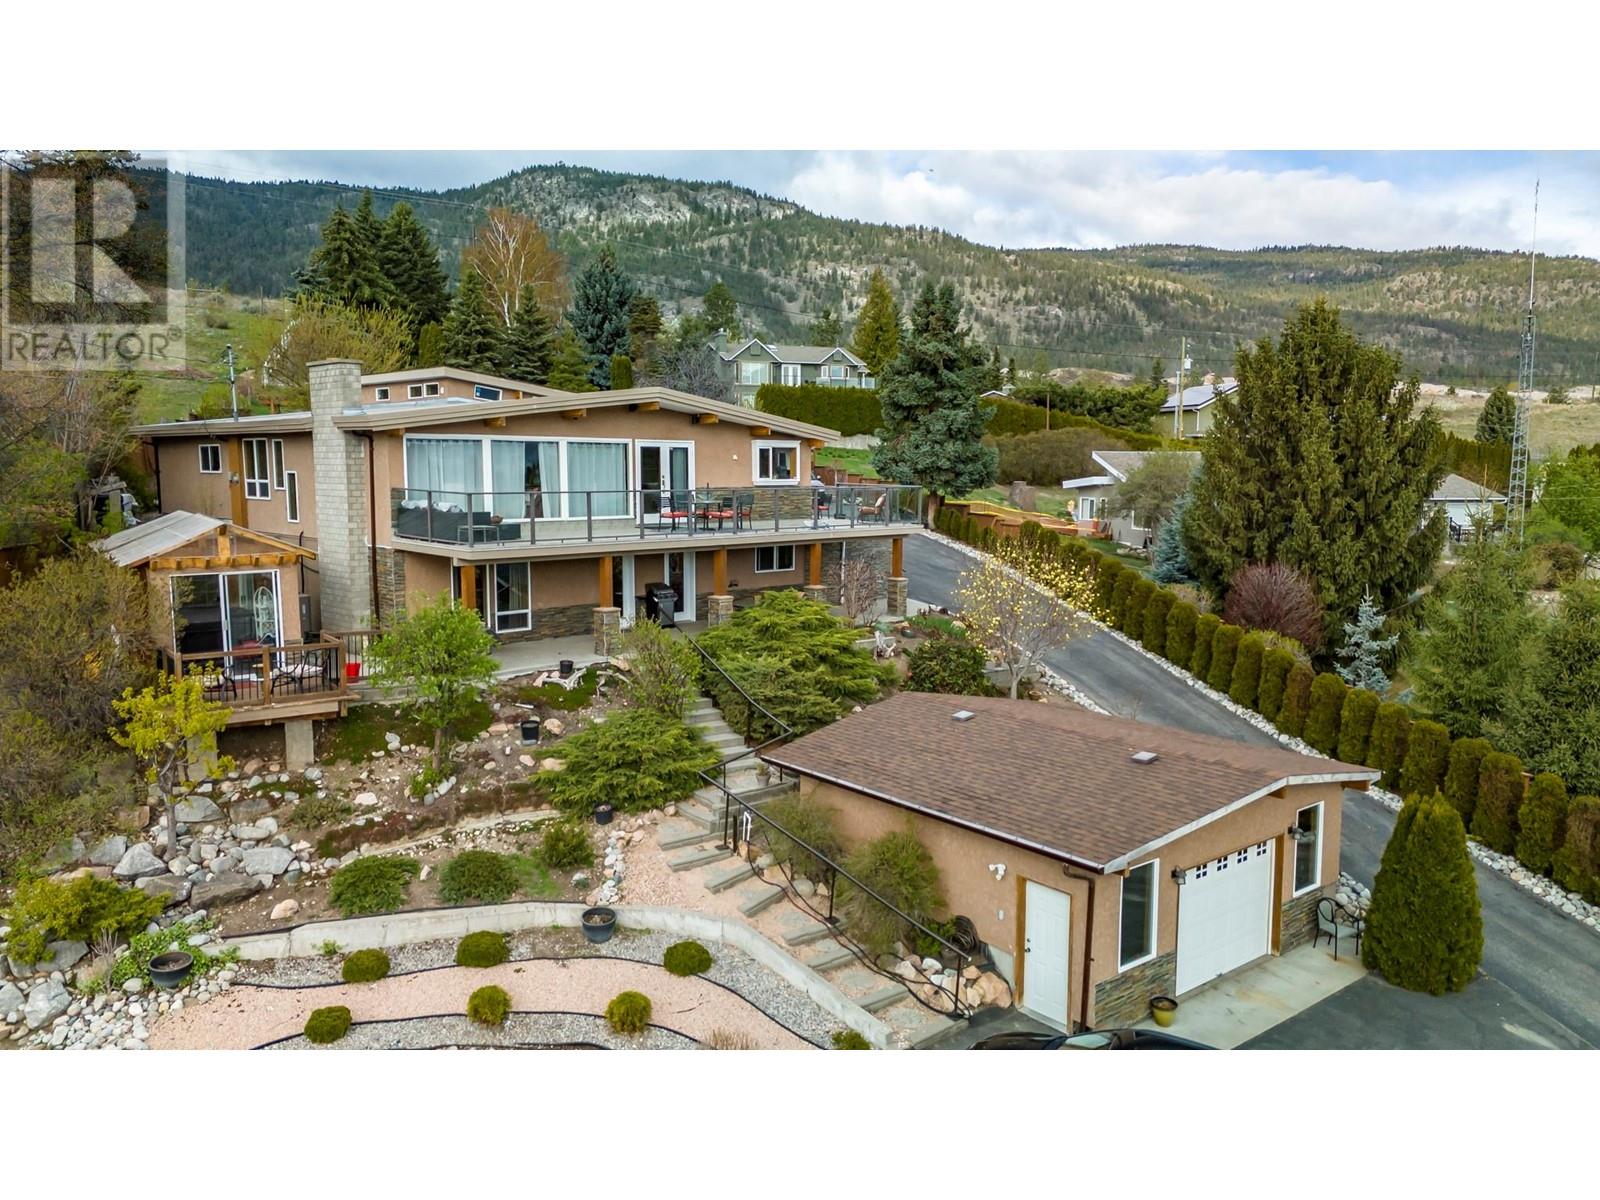 404 West Bench Drive, Husula, Penticton 